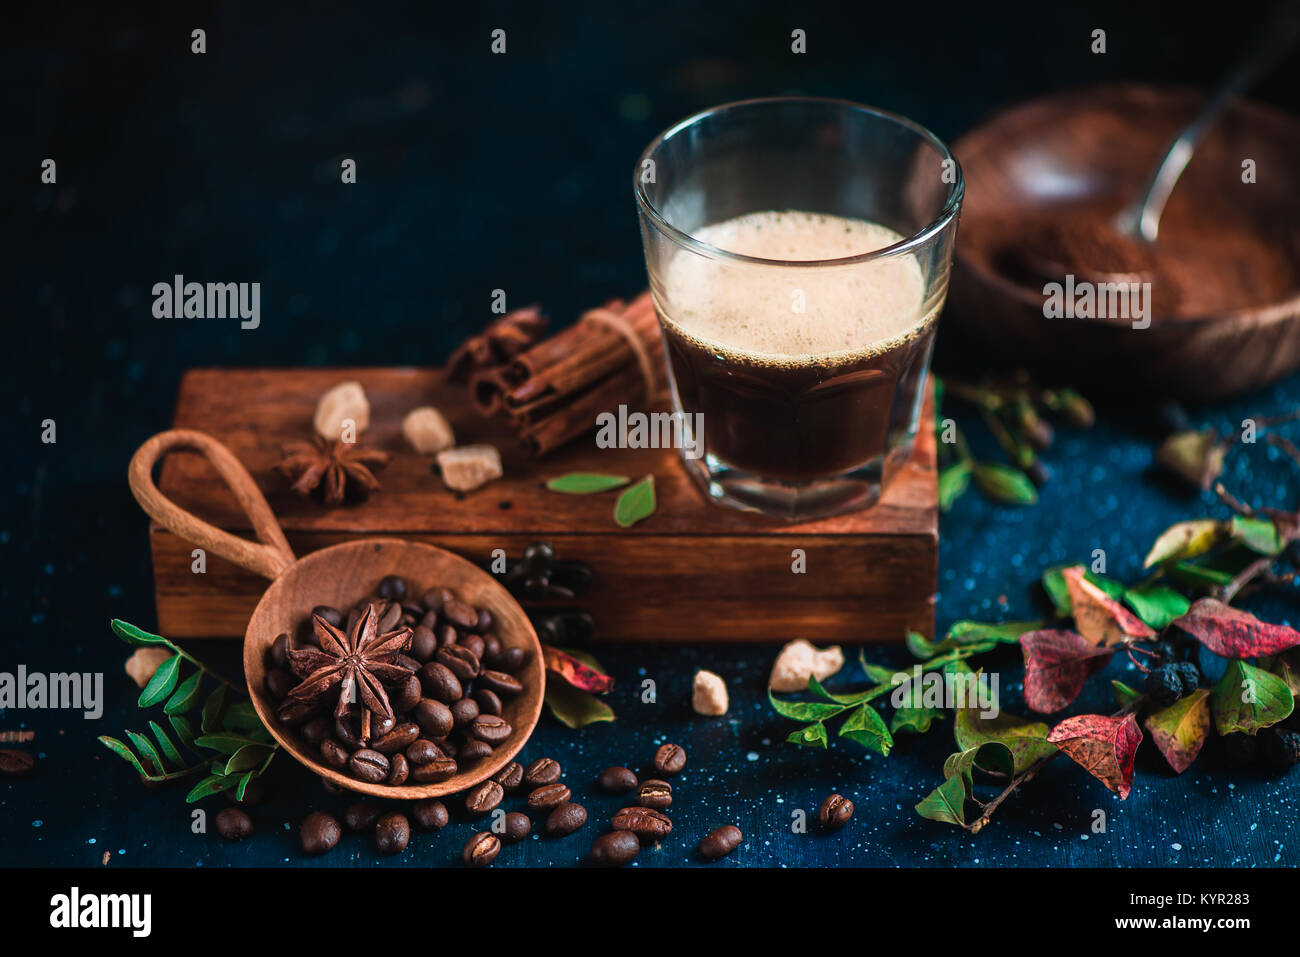 Espresso shot with foam on a wooden box with coffee beans, arabica leaves, cinnamon and spices on dark background. Brewing coffee still life. Stock Photo